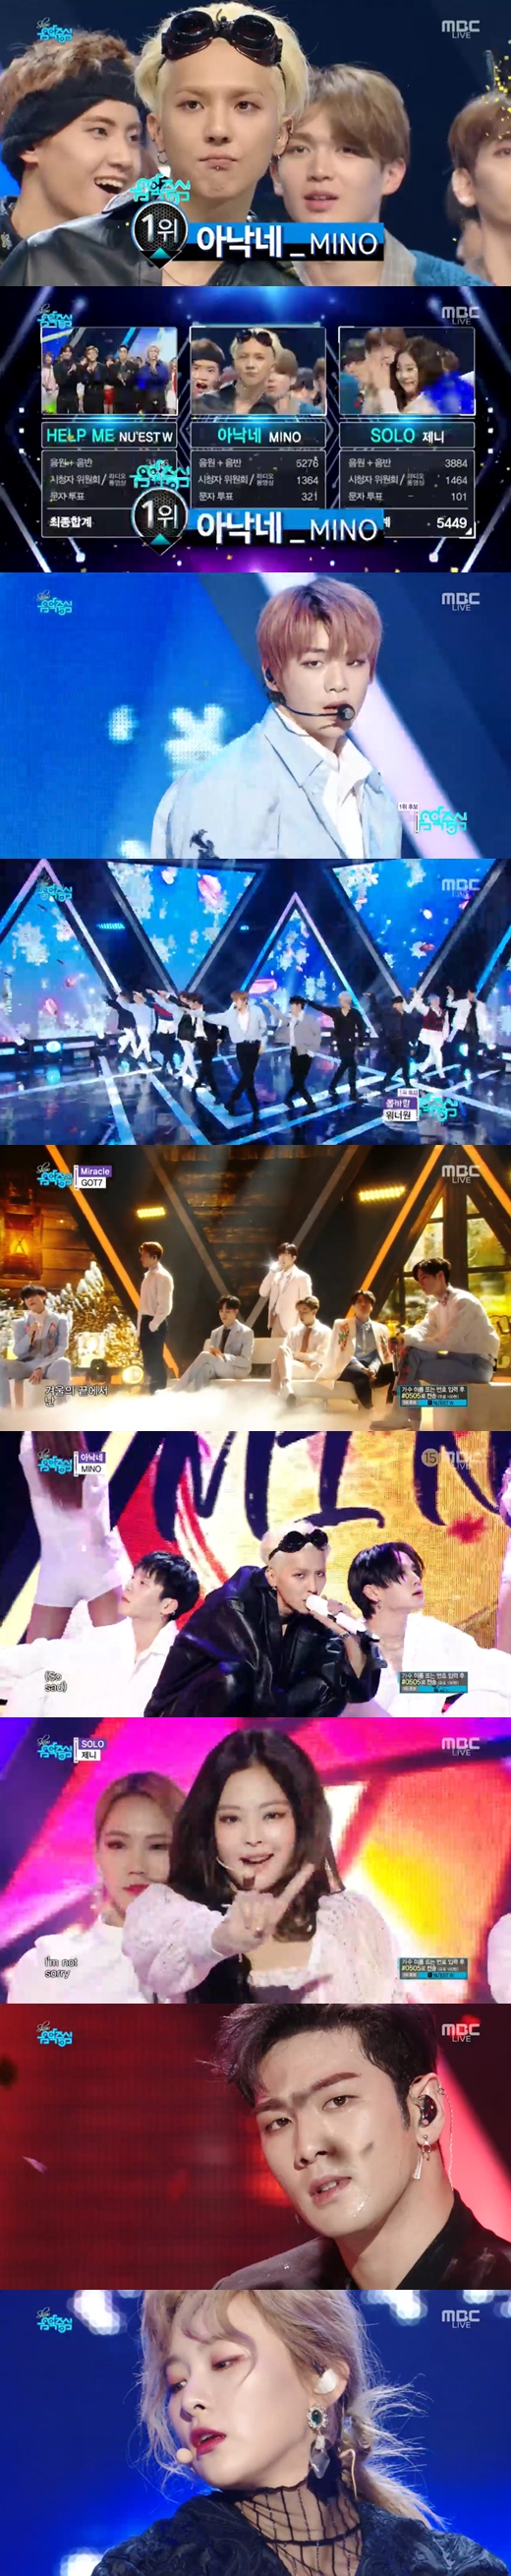 ..Wanna One Goodbye StageGroup Winner Song Min-ho to be solo song first placeI held the trophy in my arms.Song Min-hos Annun was first place together on MBC Show! Music Core broadcast on the 8th.He was on top after beating NUESTWs HELP ME, Song Min-hos Anakne and Jenny Kims SOLO for nomination.first placeAfter the award, Song Min-ho left a feeling of thank your family and fans.On the other hand, Show Show!Music Core featured GOT7, Yubin, NUESTW, Red Velvet, Song Min-ho, Jenny Kim, Wanna One, LABOUM, Mamamu, NCT127, Lovelies, Uptension, The Boyz, Mighty Mouse, Ben, Hotshot, and Dreamnote.Fans were particularly vocal on the final stage of Wanna One, which set the final stage of the activity Spring Wind at the show Show! Music Core.Spring Wind is a song that captures the will to be one again, fighting against the fate that you and I have missed each other.GOT7 set the stage for a comeback: Miracle is a ballad song that sings when a true miracle moment is for GOT7.LABOUM has been carrying the title track Turn the Light in five months.Unlike the existing LABOUM songs, the simple yet powerful medium tempo and the pop-like charming Latin style sound are impressive.